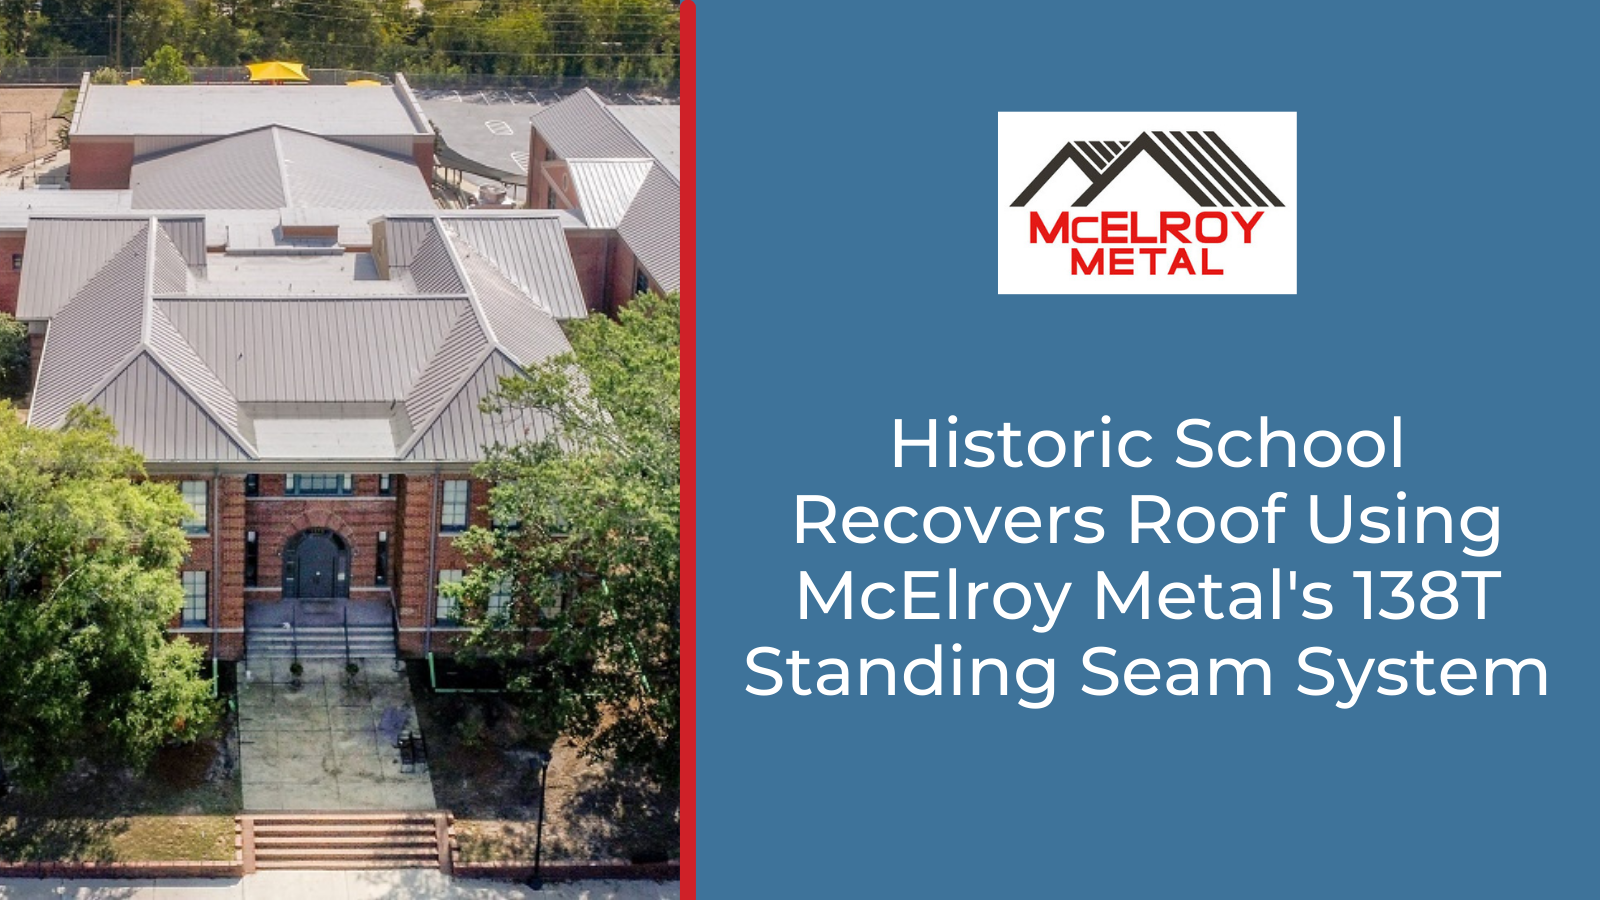 Historic School Recovers Roof Using McElroy Metal's 138T Standing Seam System